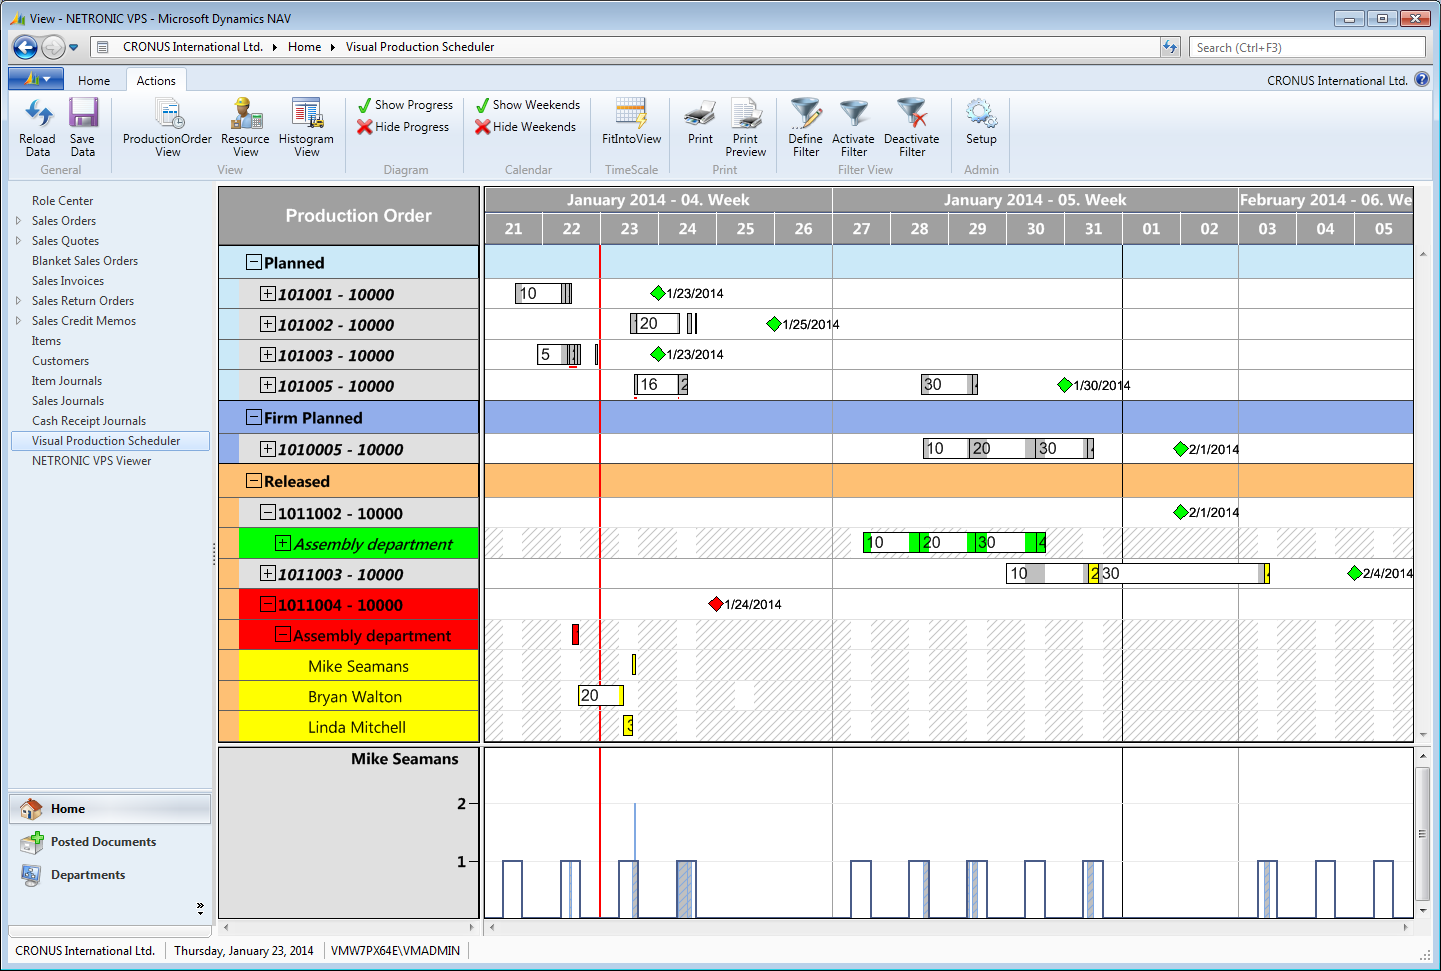 Visual Production Scheduler in action at ESK Schultze